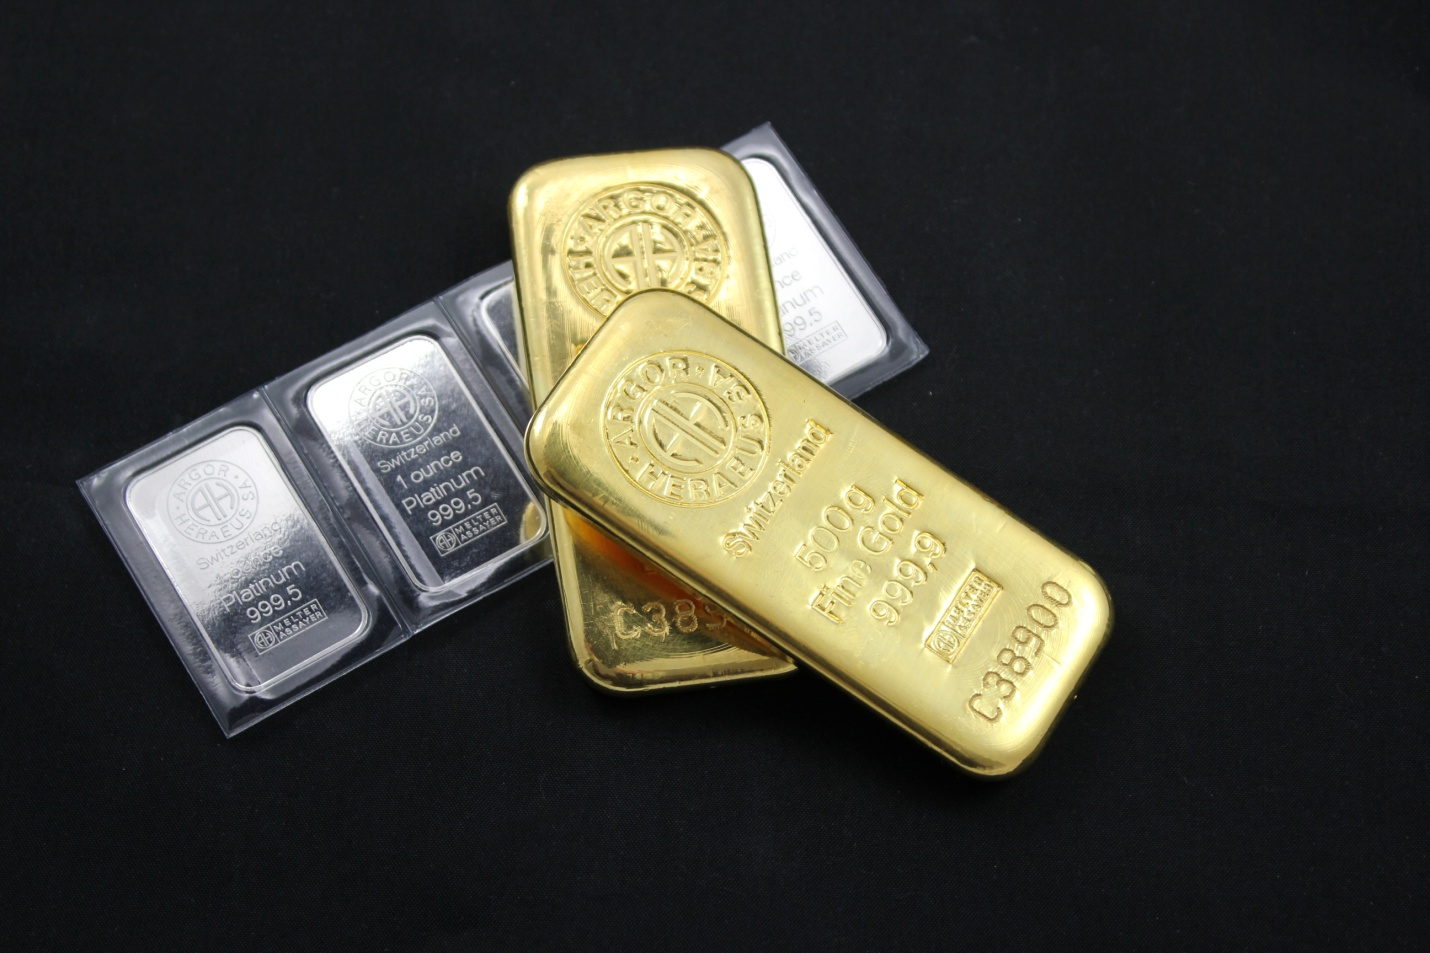 A stack of silver and gold bullion bars